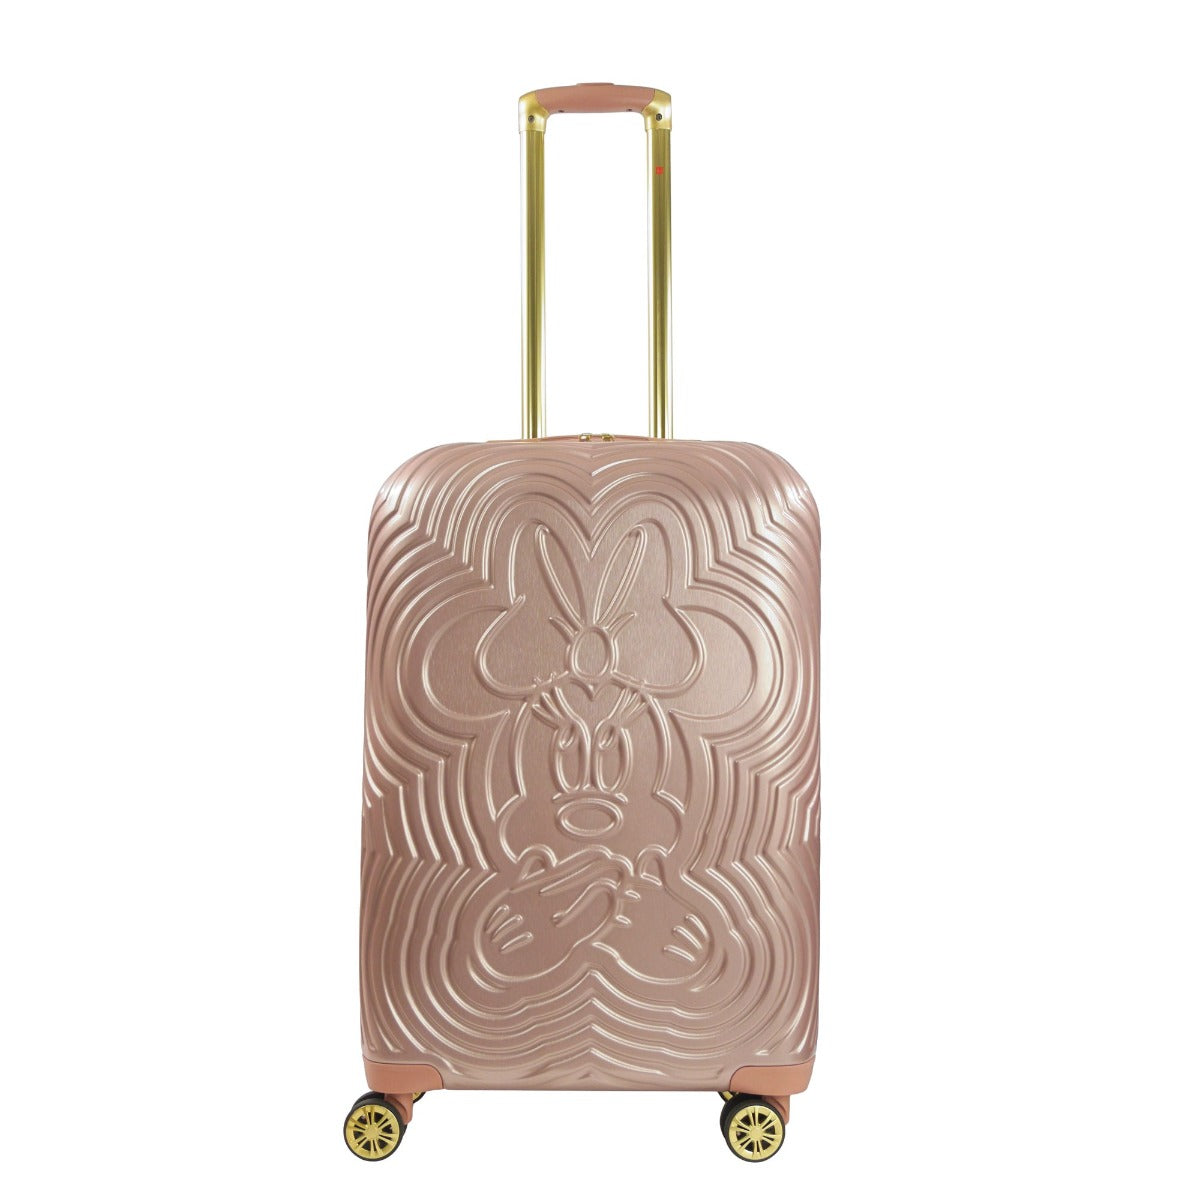 Disney Ful Playful Minnie Mouse 26" spinner suitcase hard sided luggage rose gold